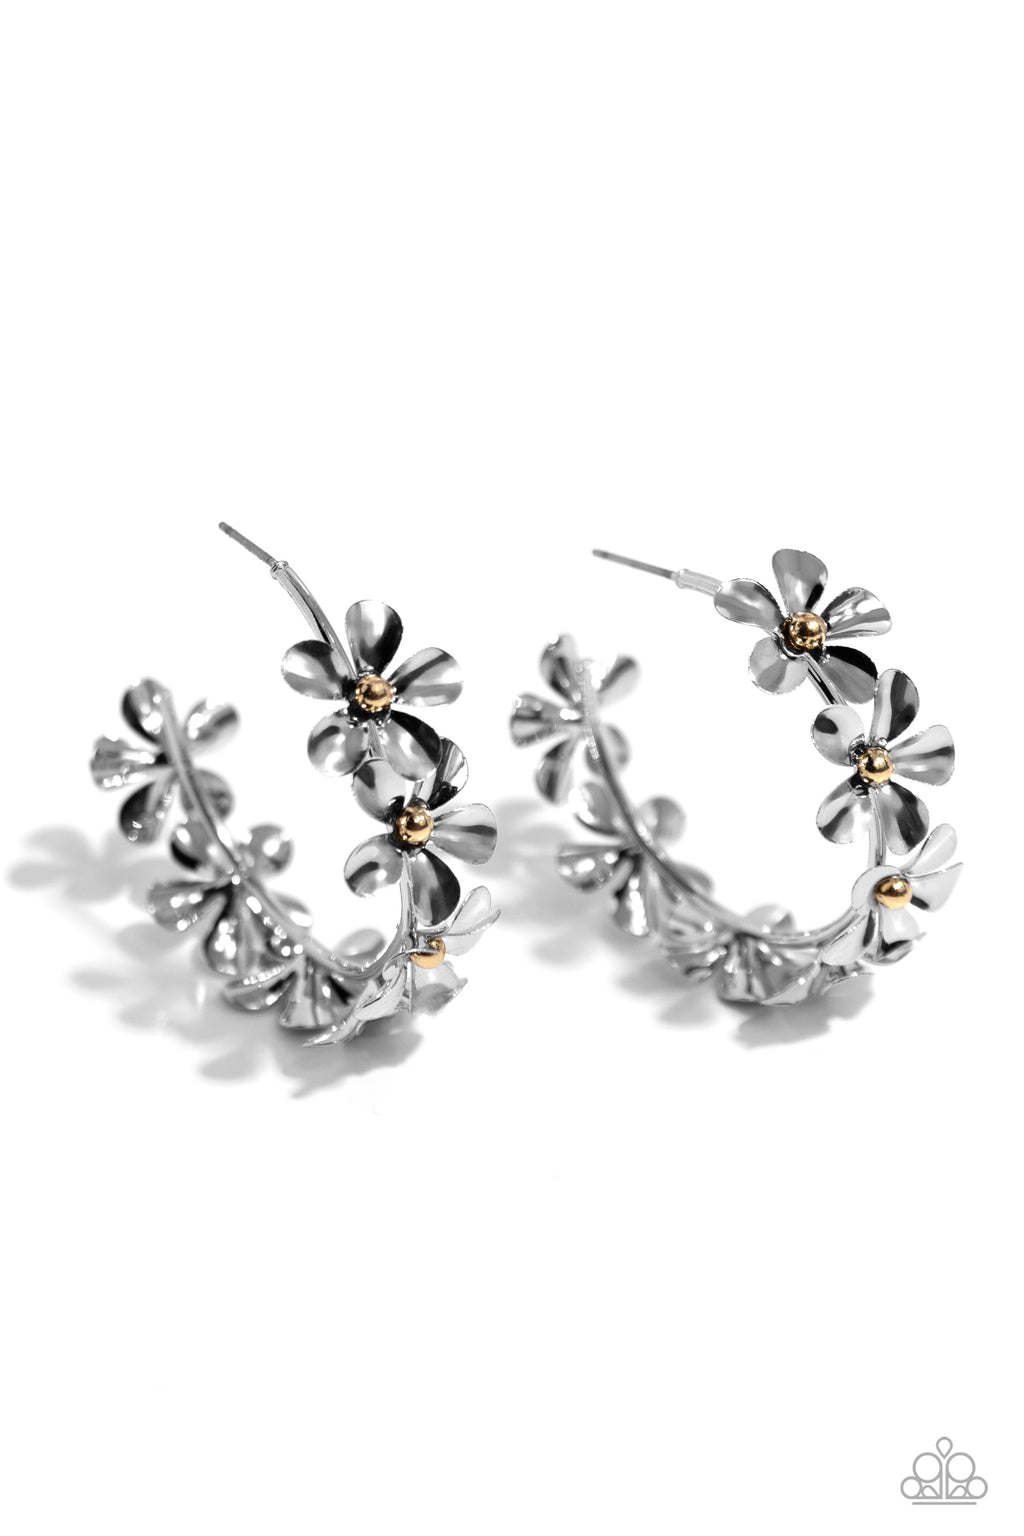 five-dollar-jewelry-floral-flamenco-silver-earrings-paparazzi-accessories